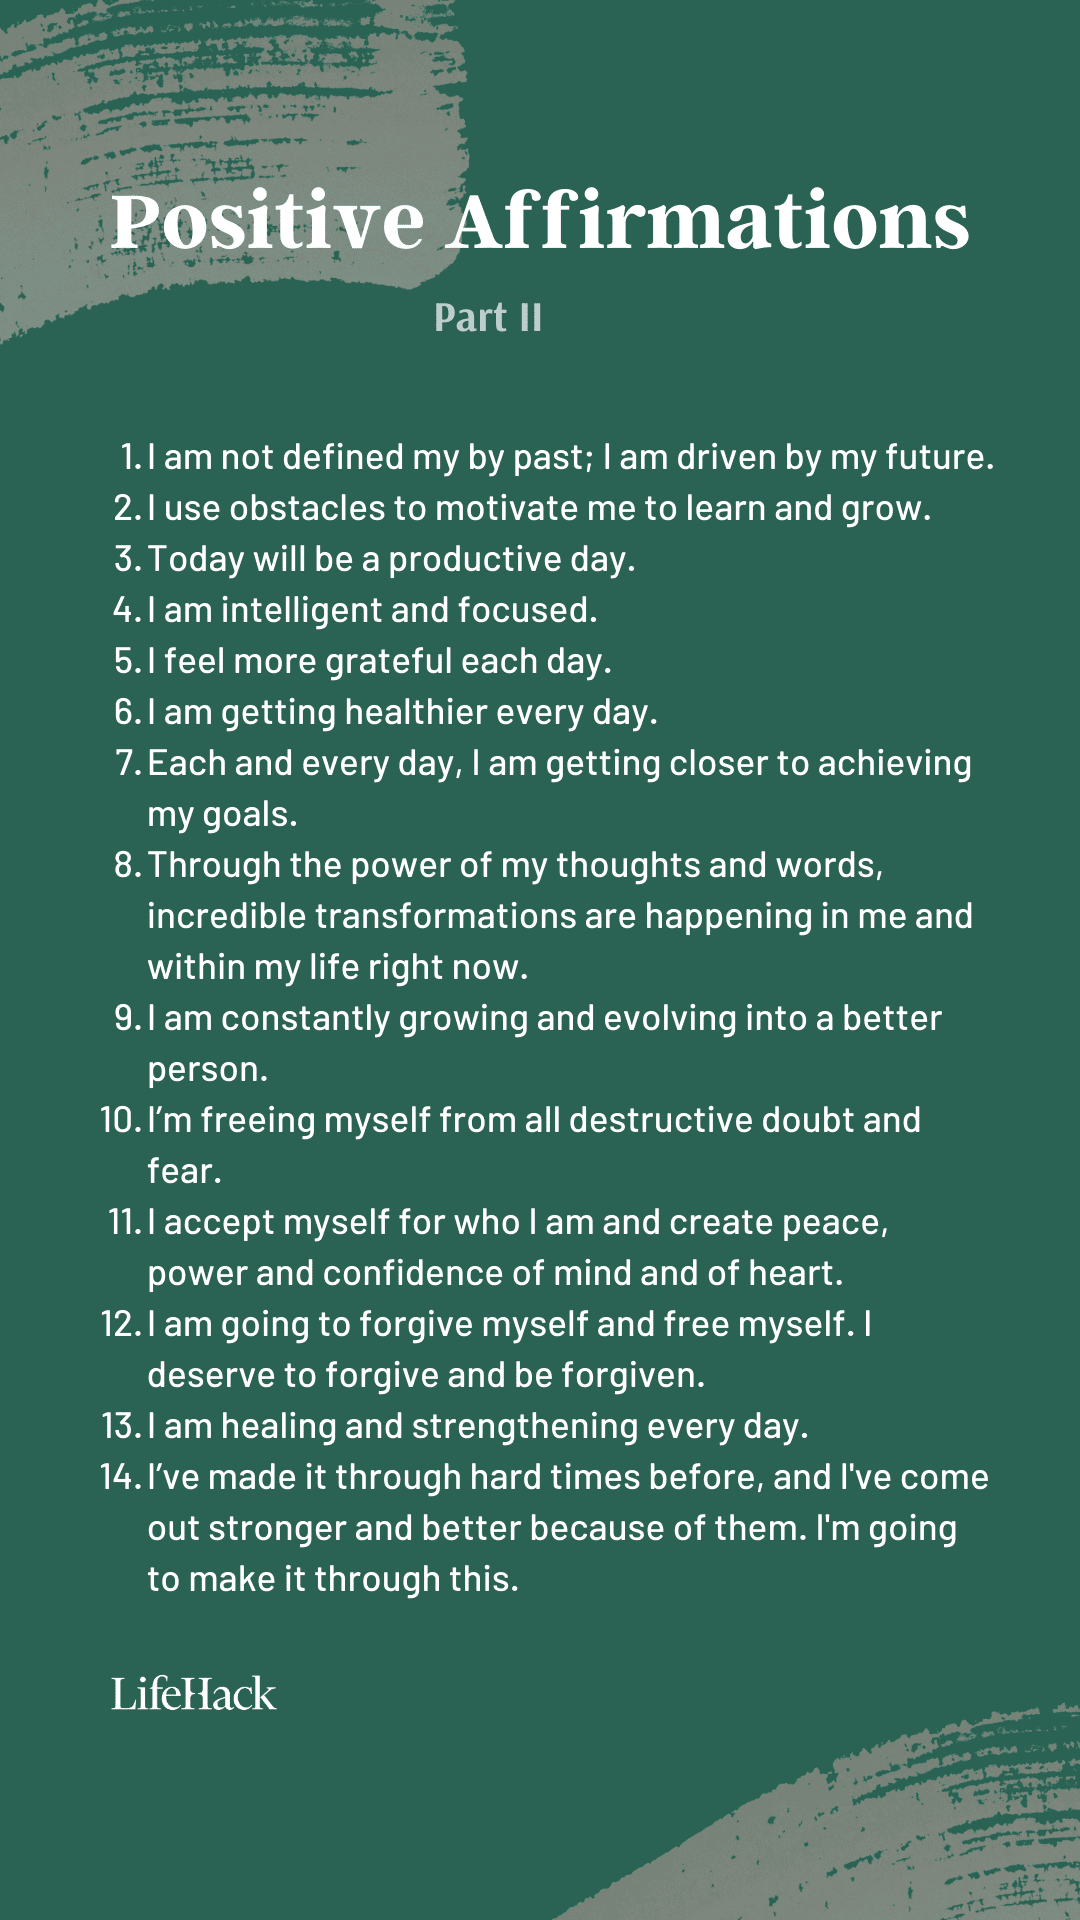 50 Self-Affirmations to Help You Stay Motivated Every Day